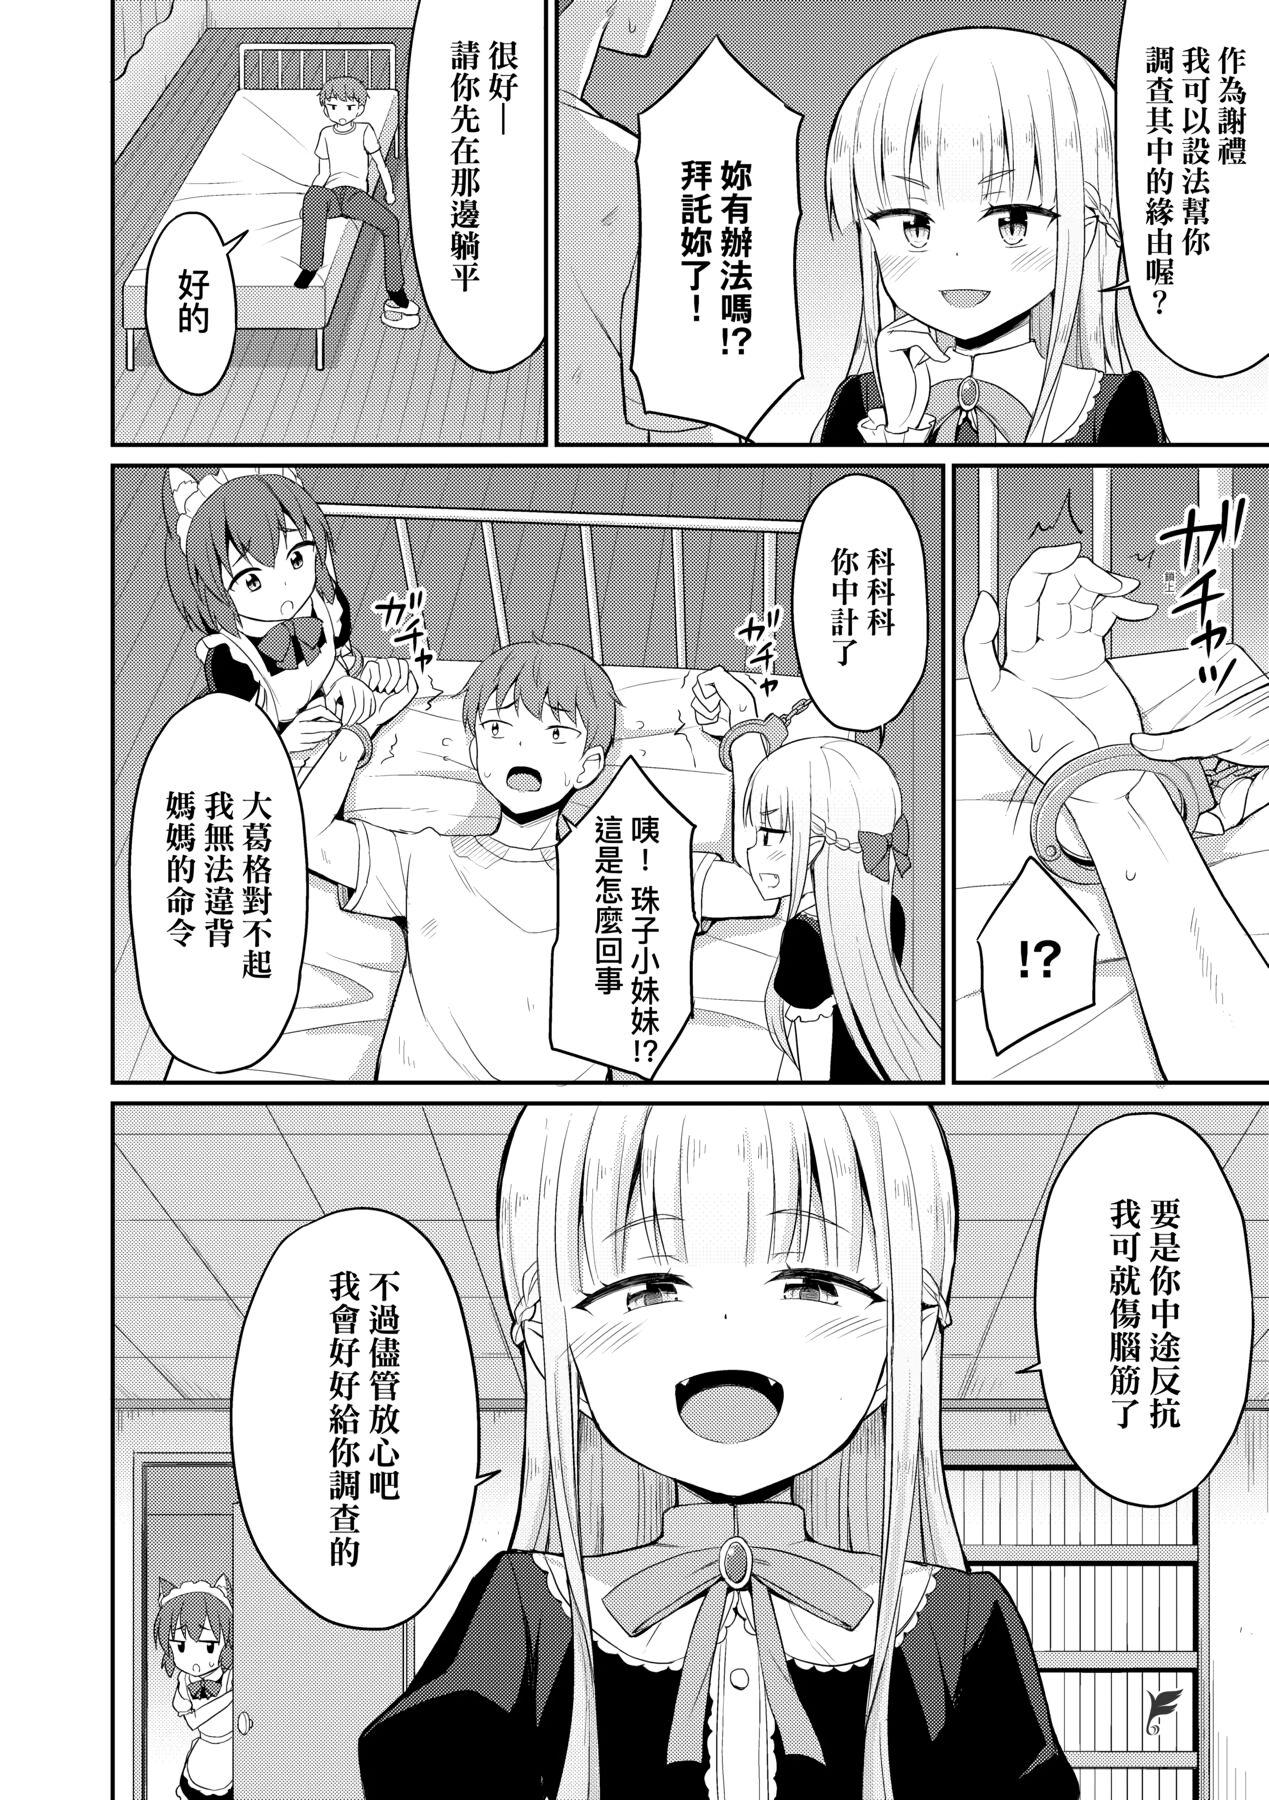 Leaked Cafe Eternal e Youkoso! | 歡迎光臨咖啡永遠娘! Jeans - Page 11